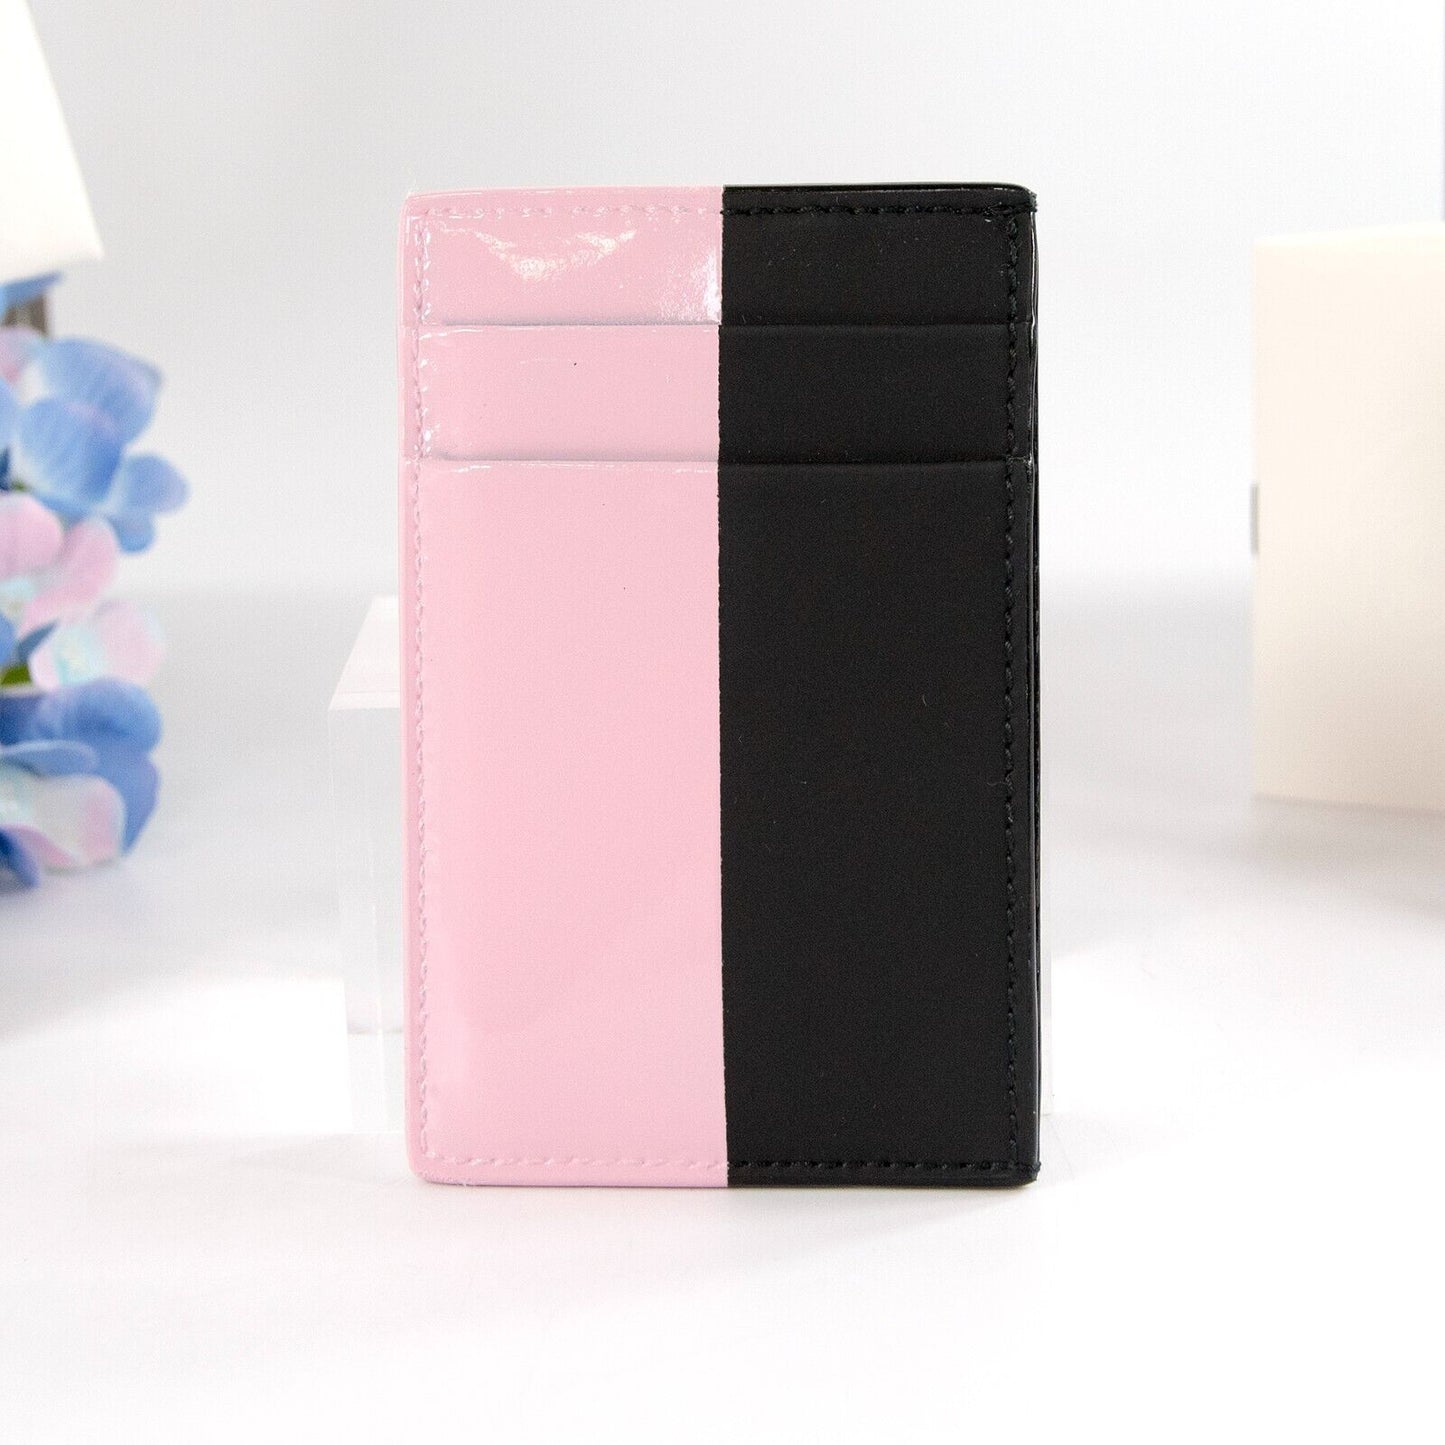 Alexander McQueen Black Ice Pink Leather Card Case Holder NWT